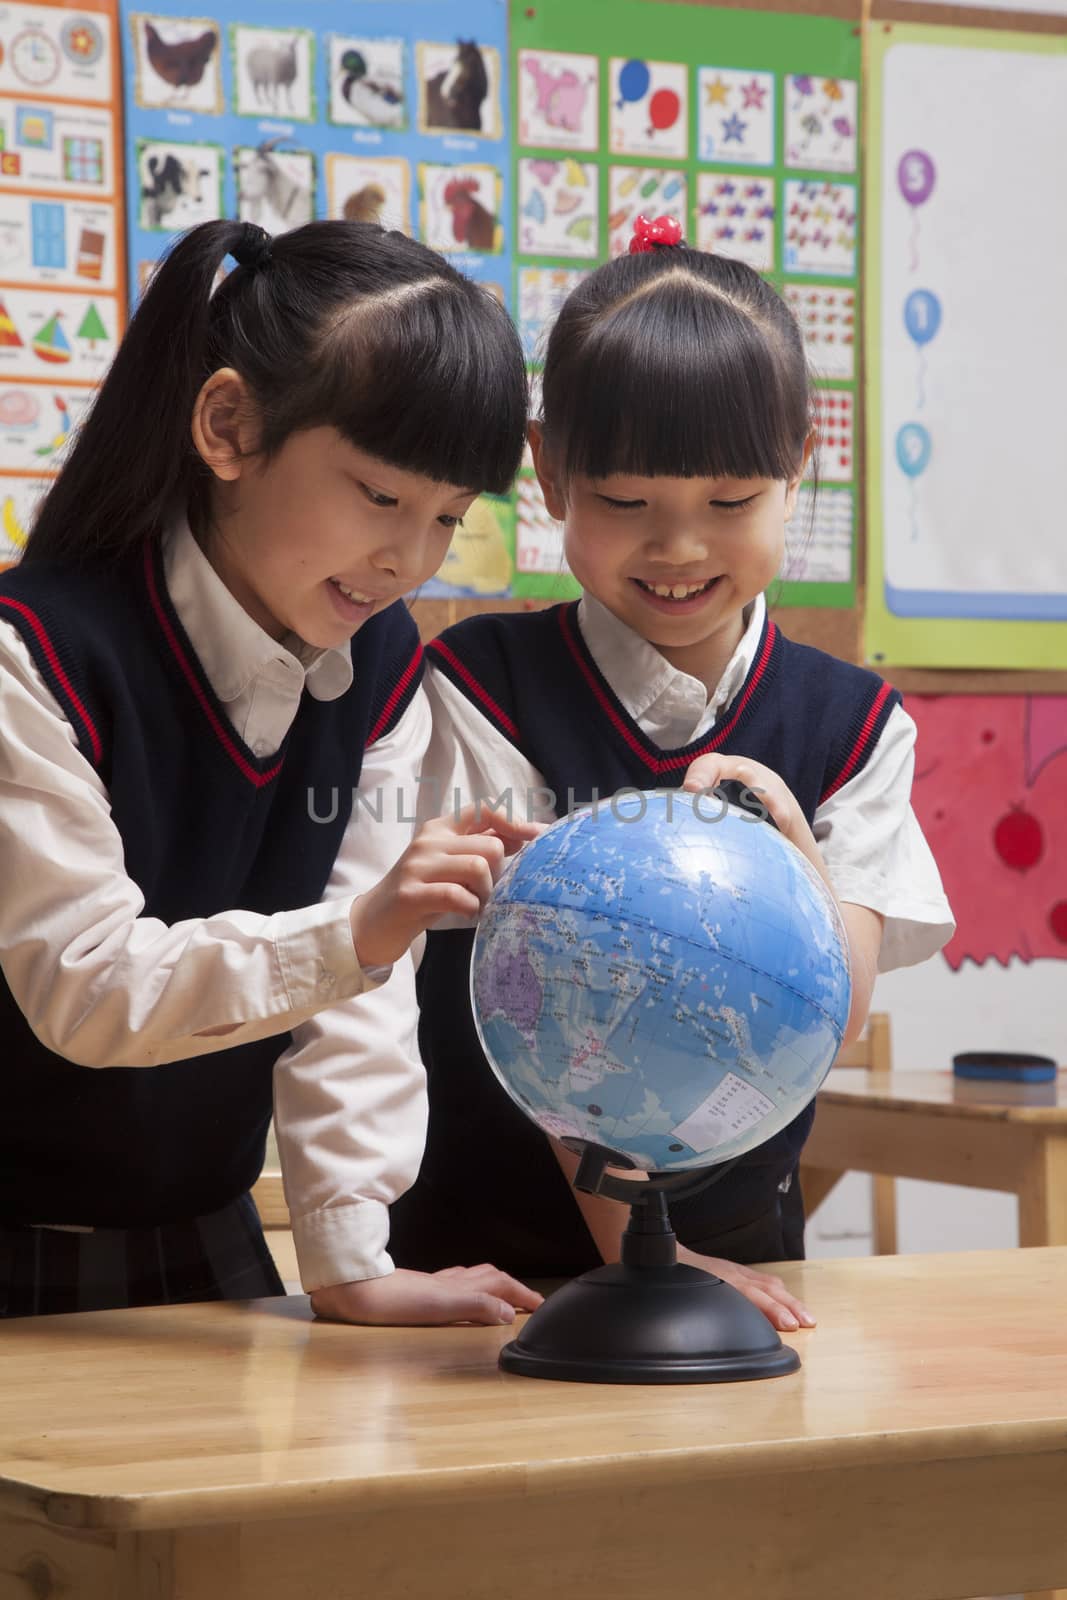 Schoolgirls looking at a globe in the classroom by XiXinXing